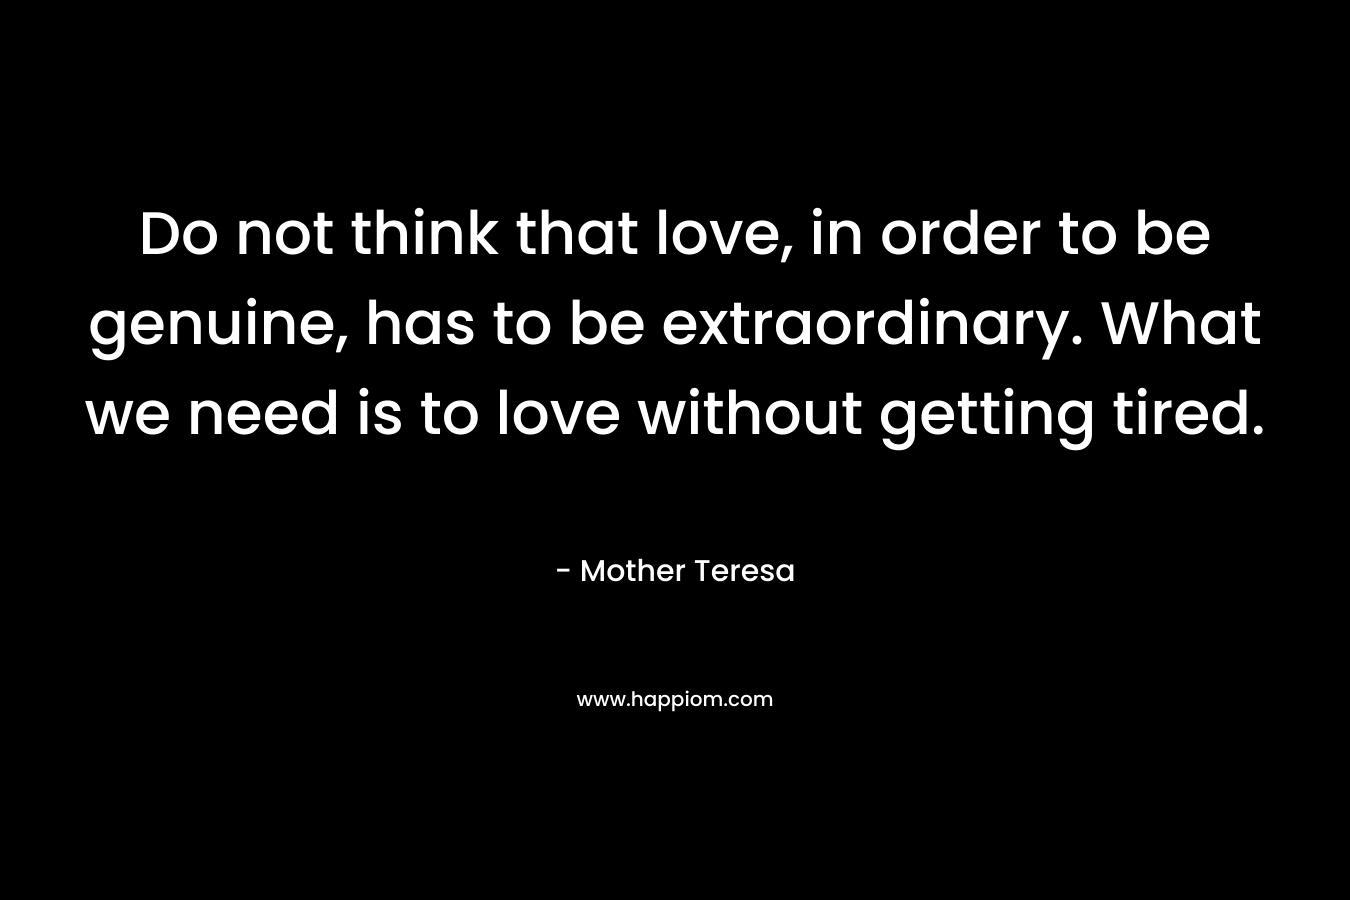 Do not think that love, in order to be genuine, has to be extraordinary. What we need is to love without getting tired. – Mother Teresa